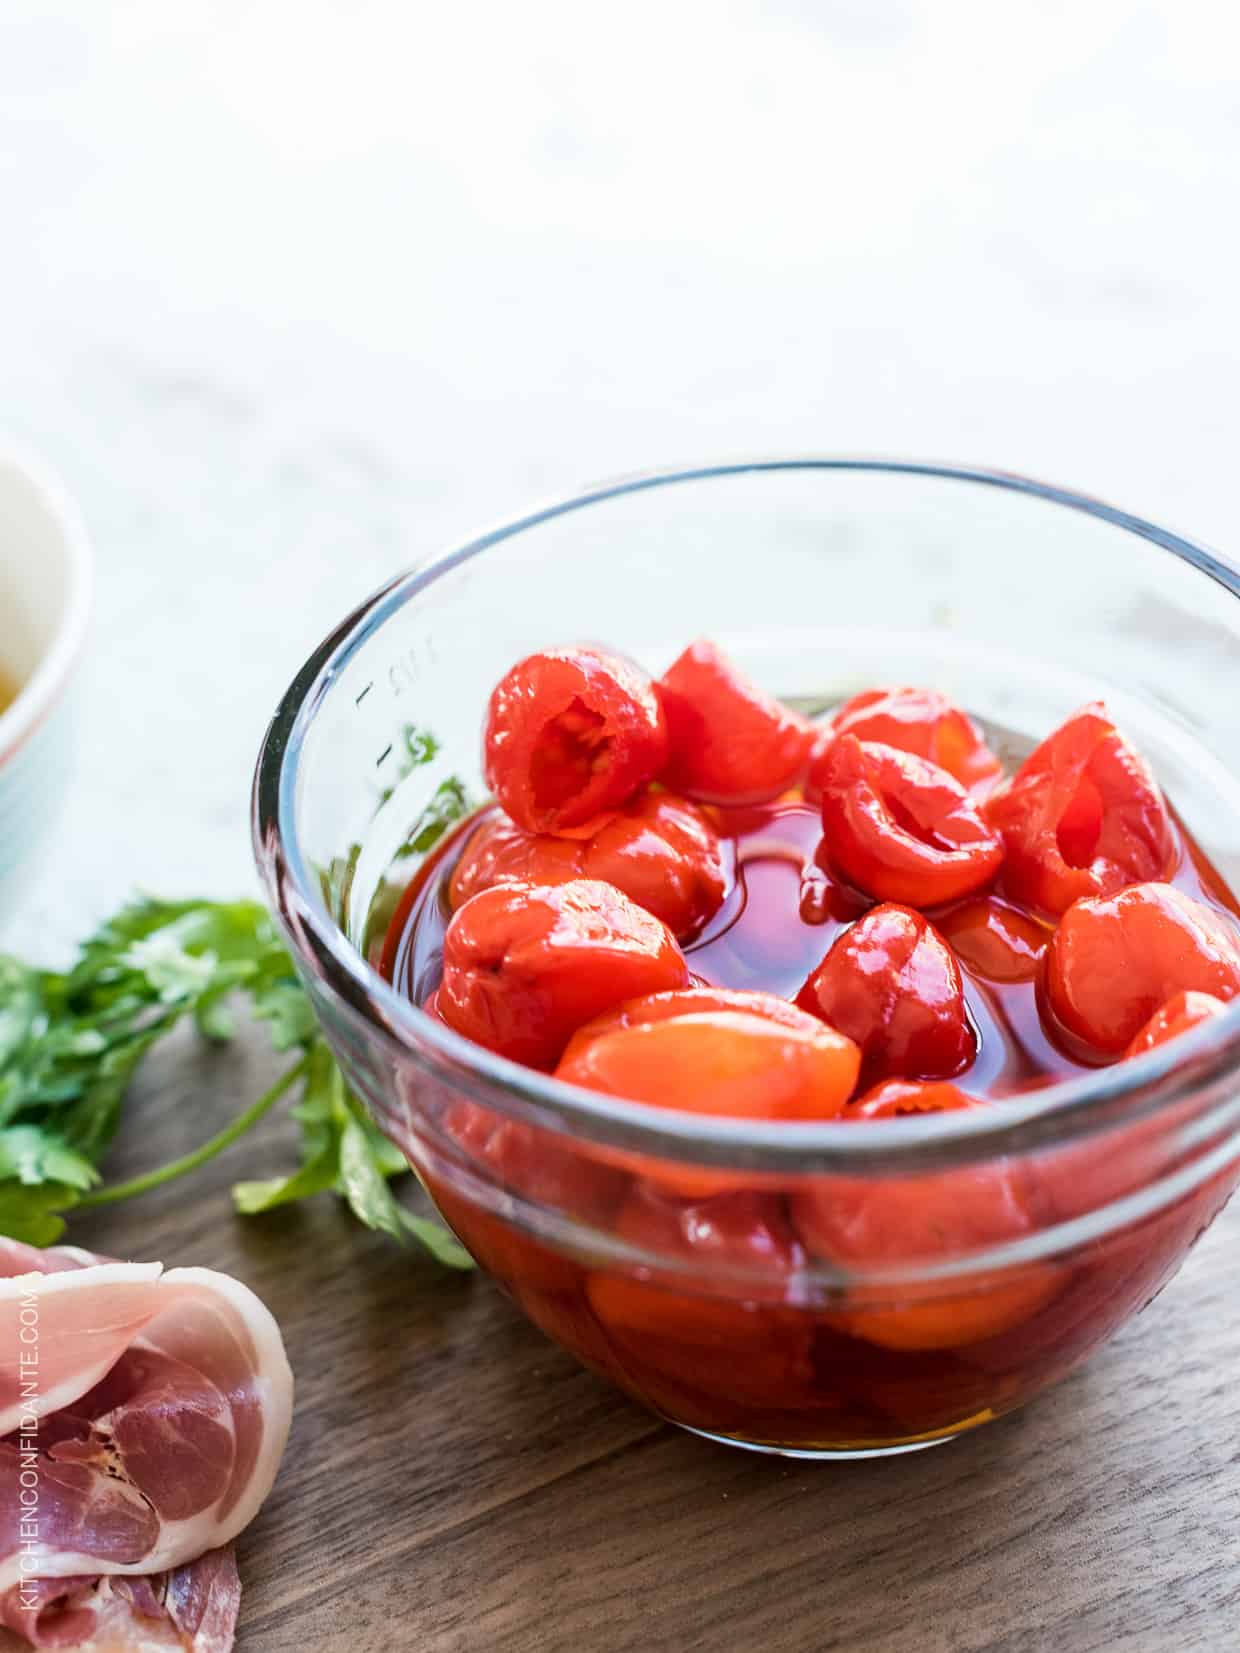 A glass bowl filled with peppadew peppers.